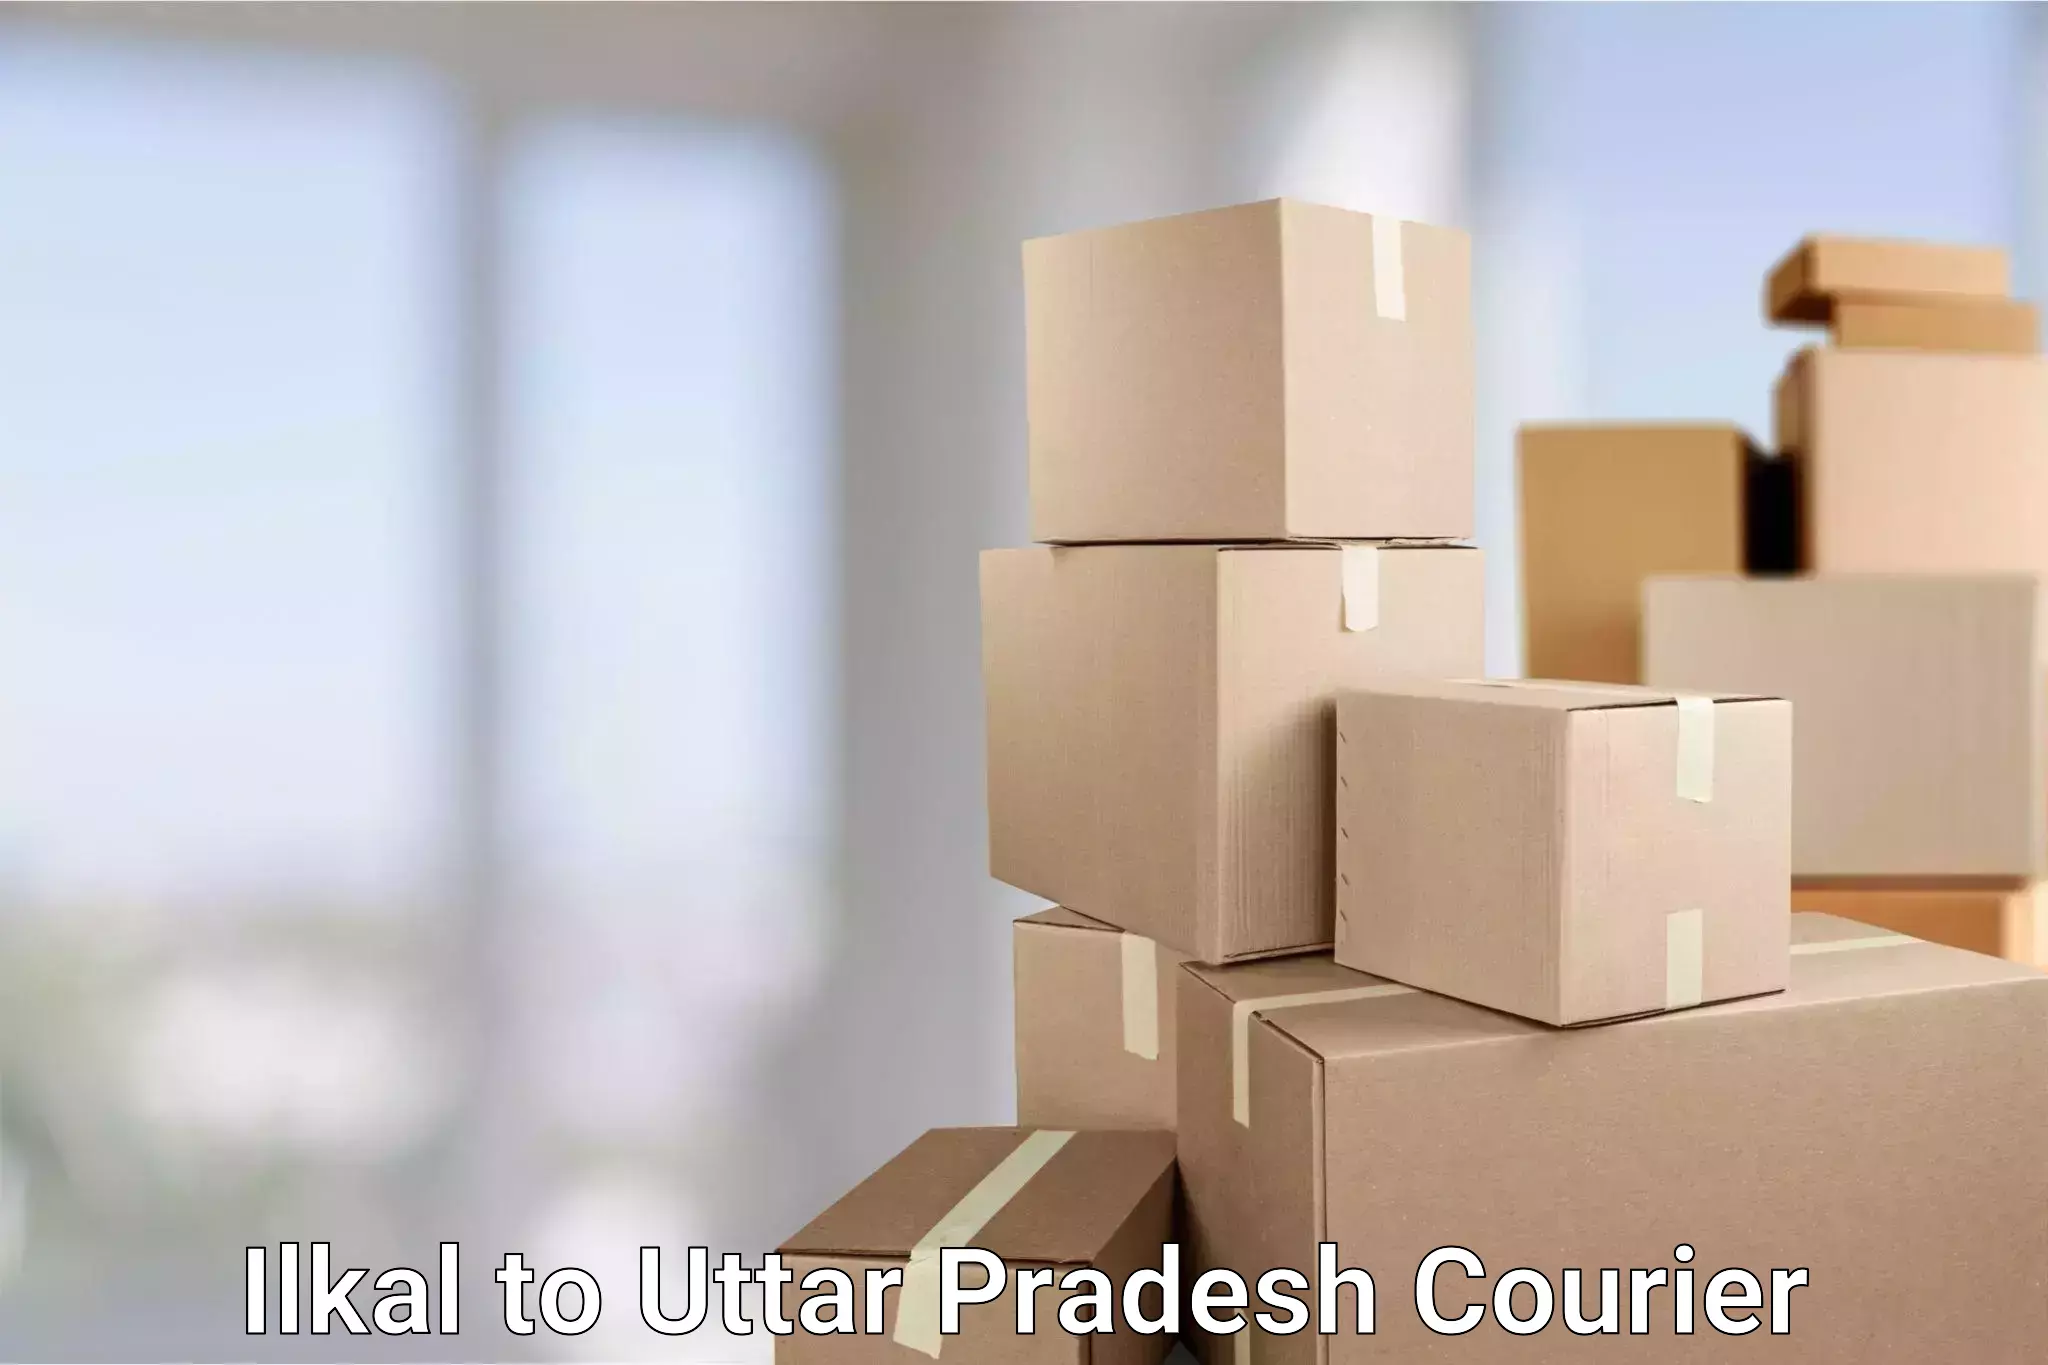 Corporate courier solutions Ilkal to Allahabad